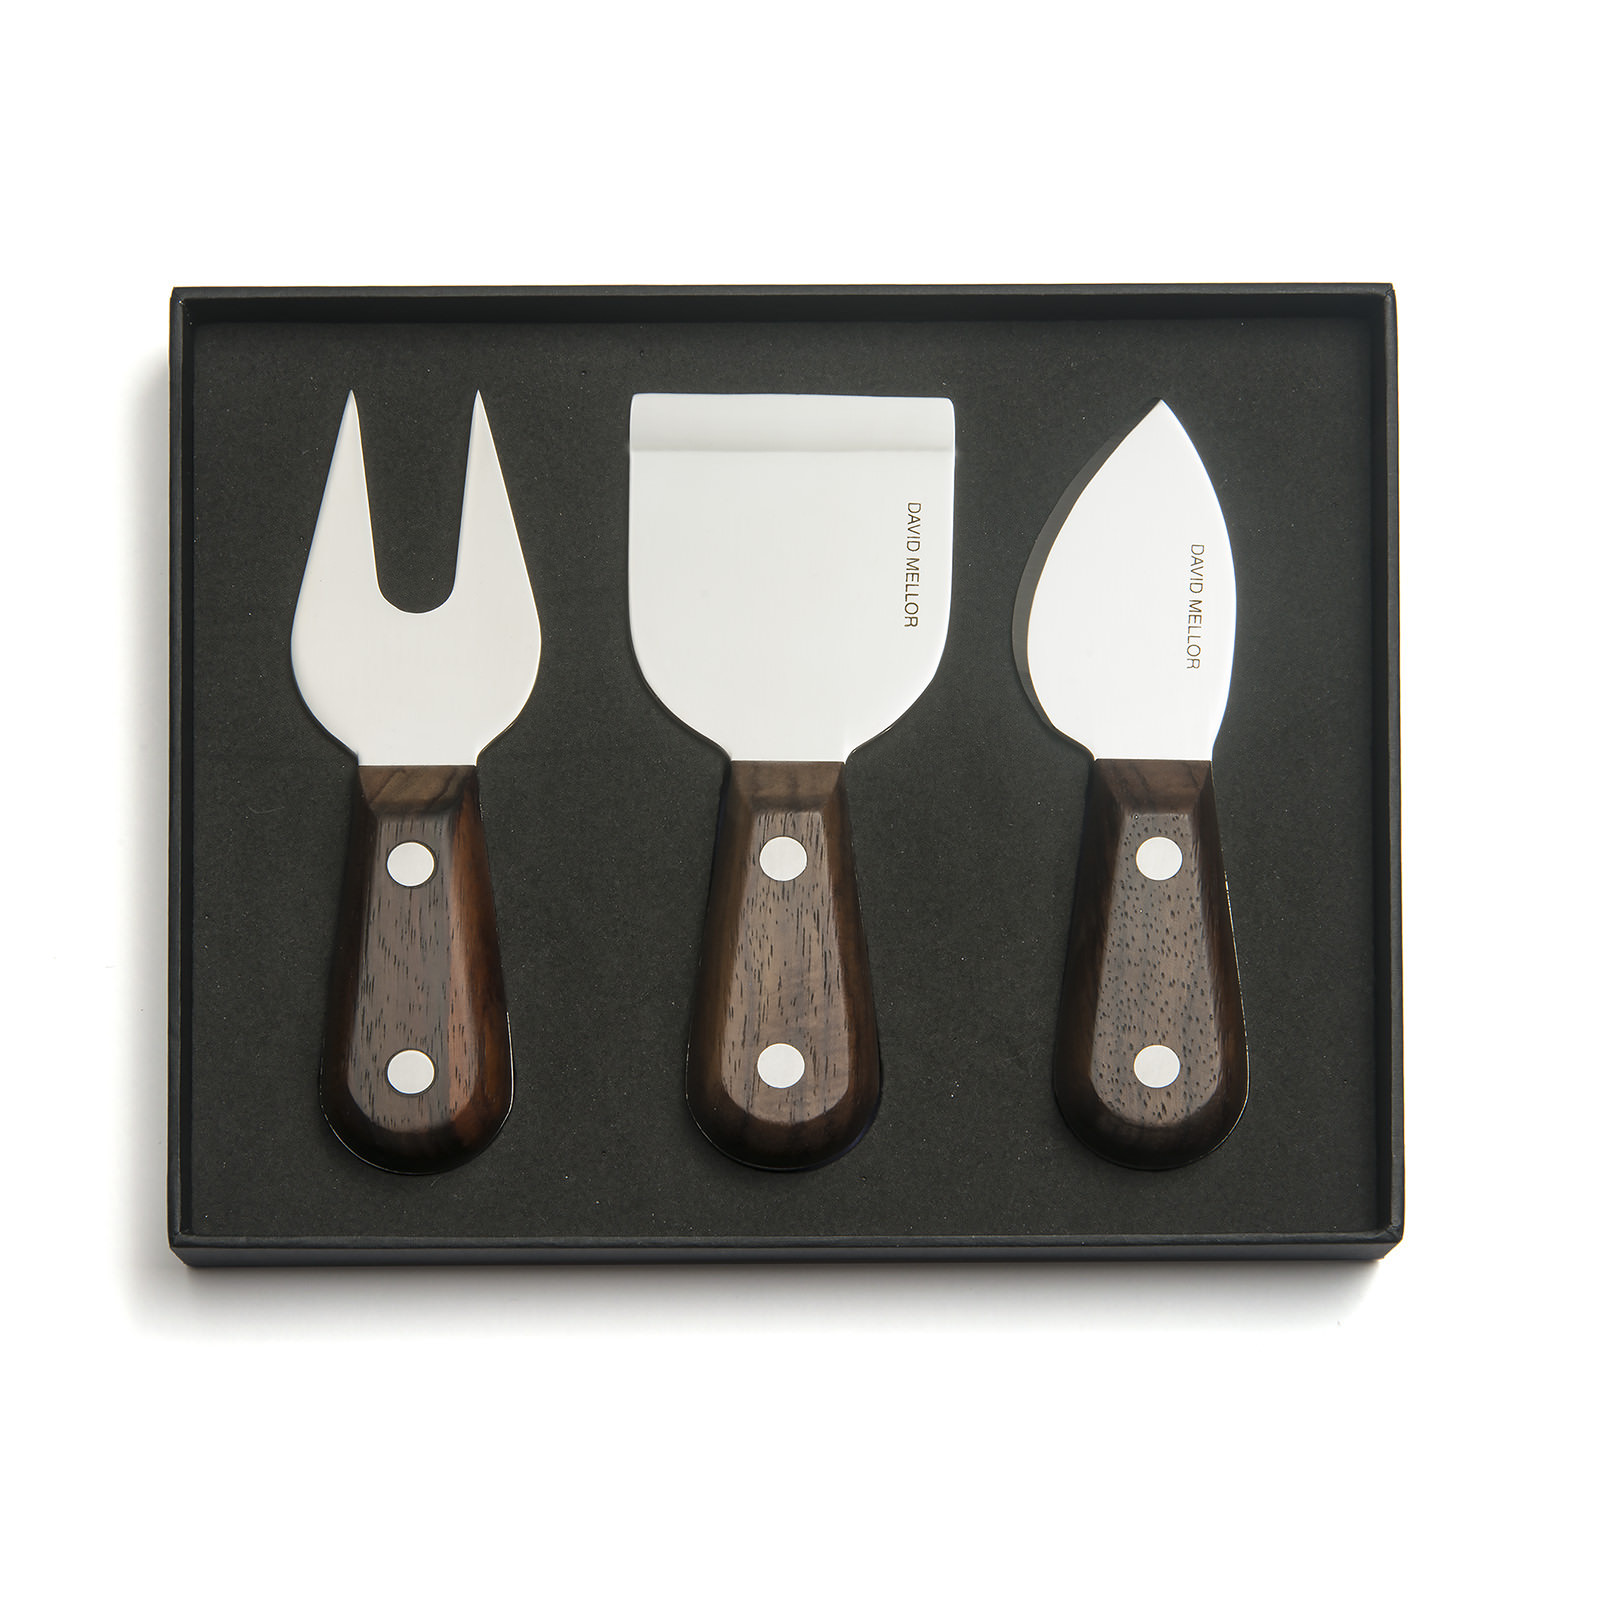 Three wooden cheese knives with silver blades